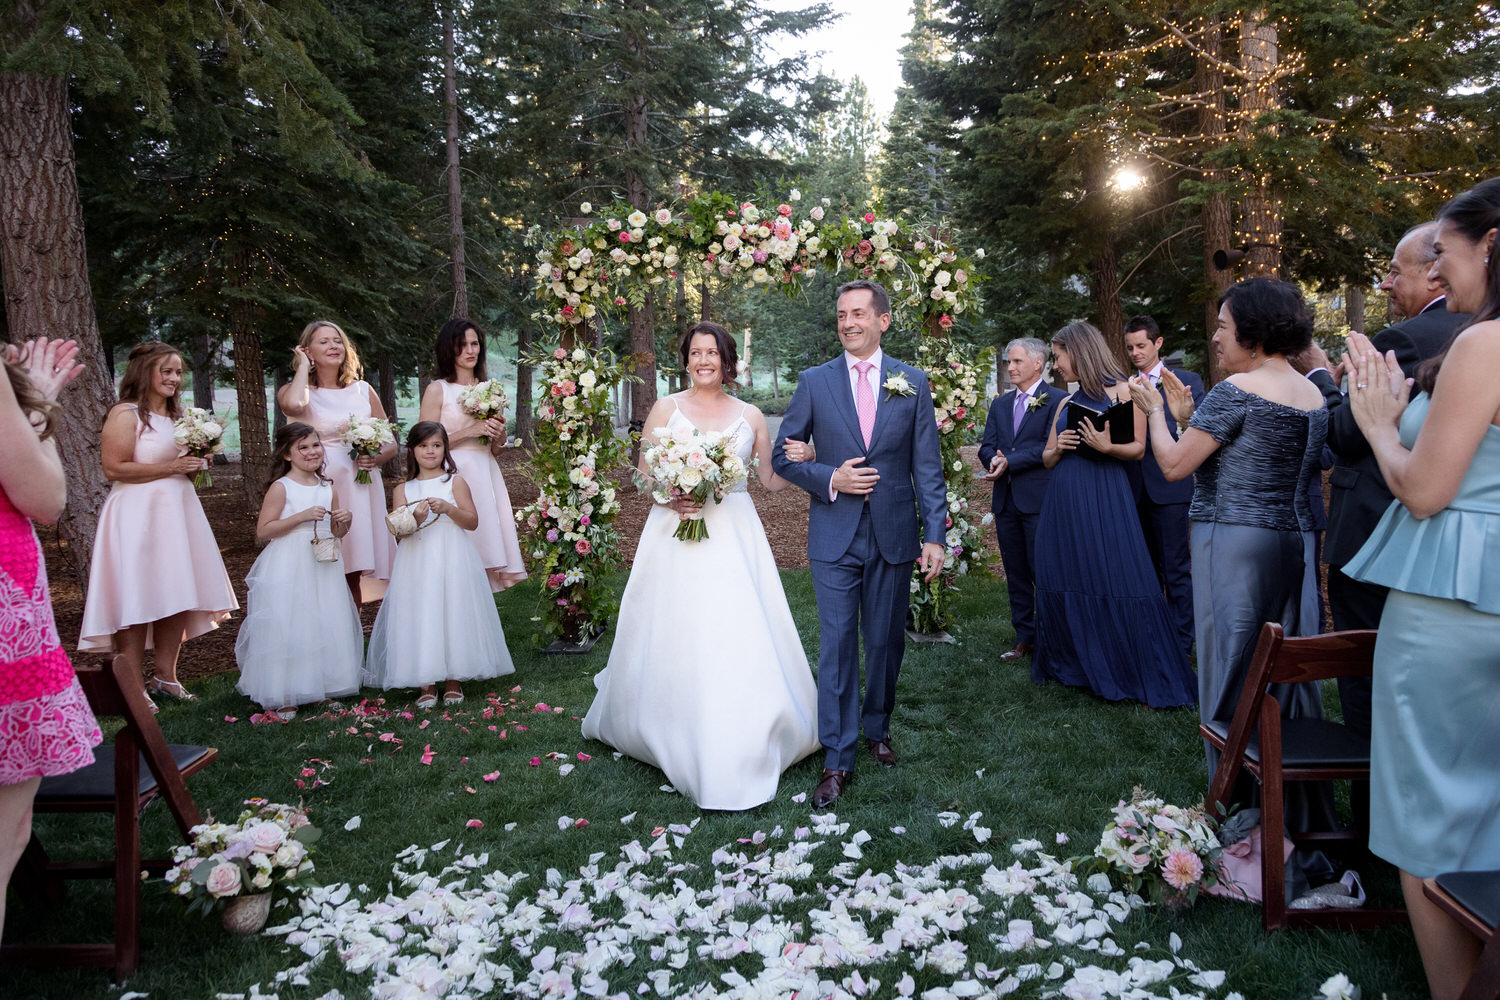 An small outdoor wedding ceremony at The Woods, a forest-like venue at the Ritz Carlton Tahoe.